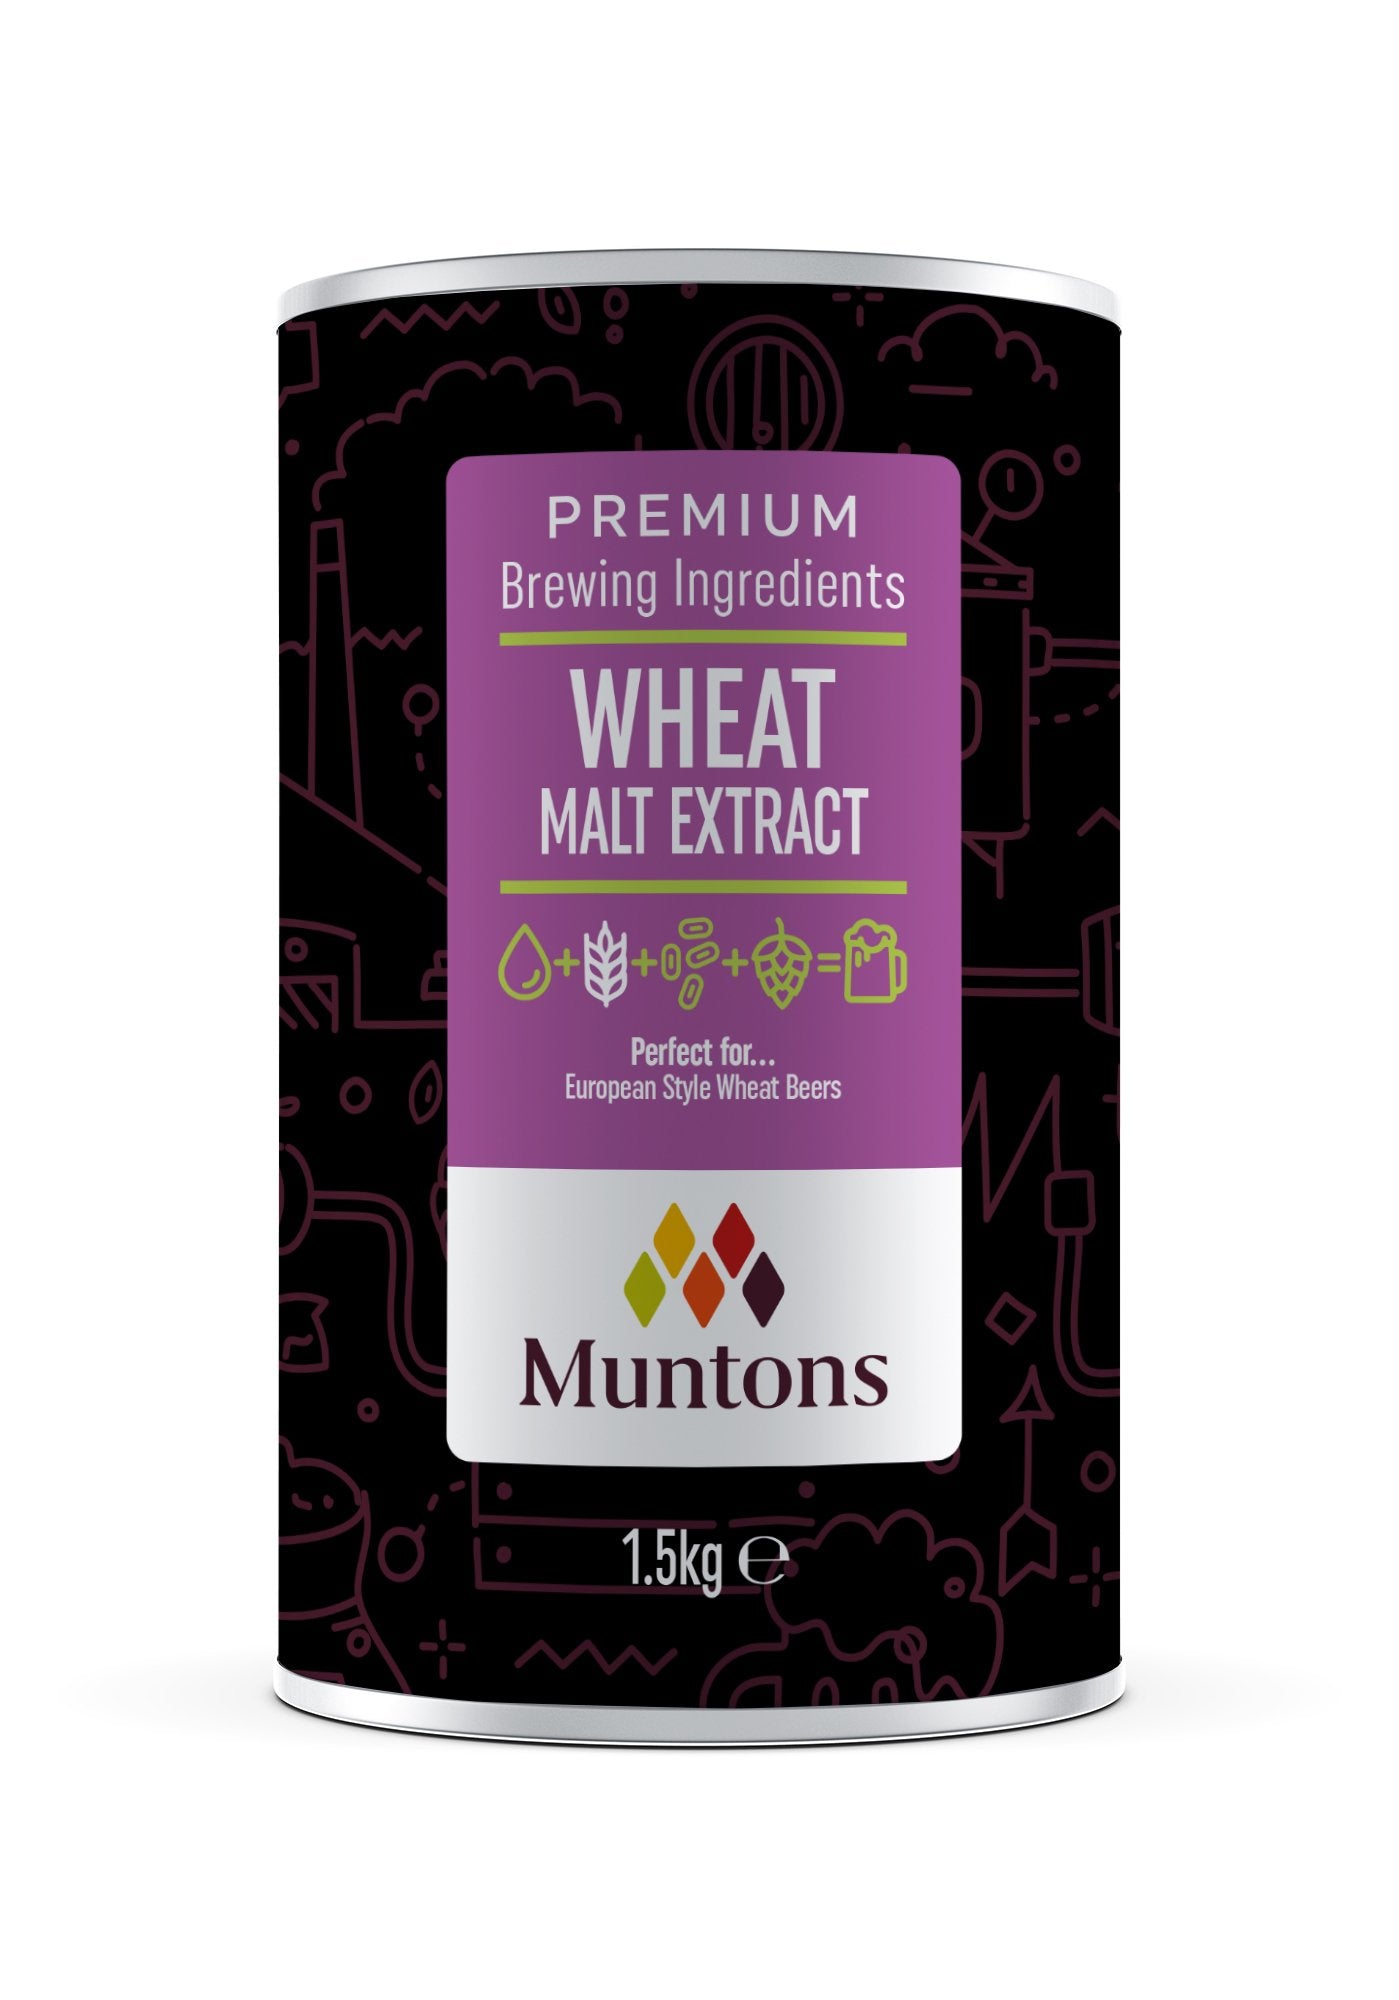 Muntons Wheat Extract 1.5kg - All Things Fermented | Home Brew Shop NZ | Supplies | Equipment